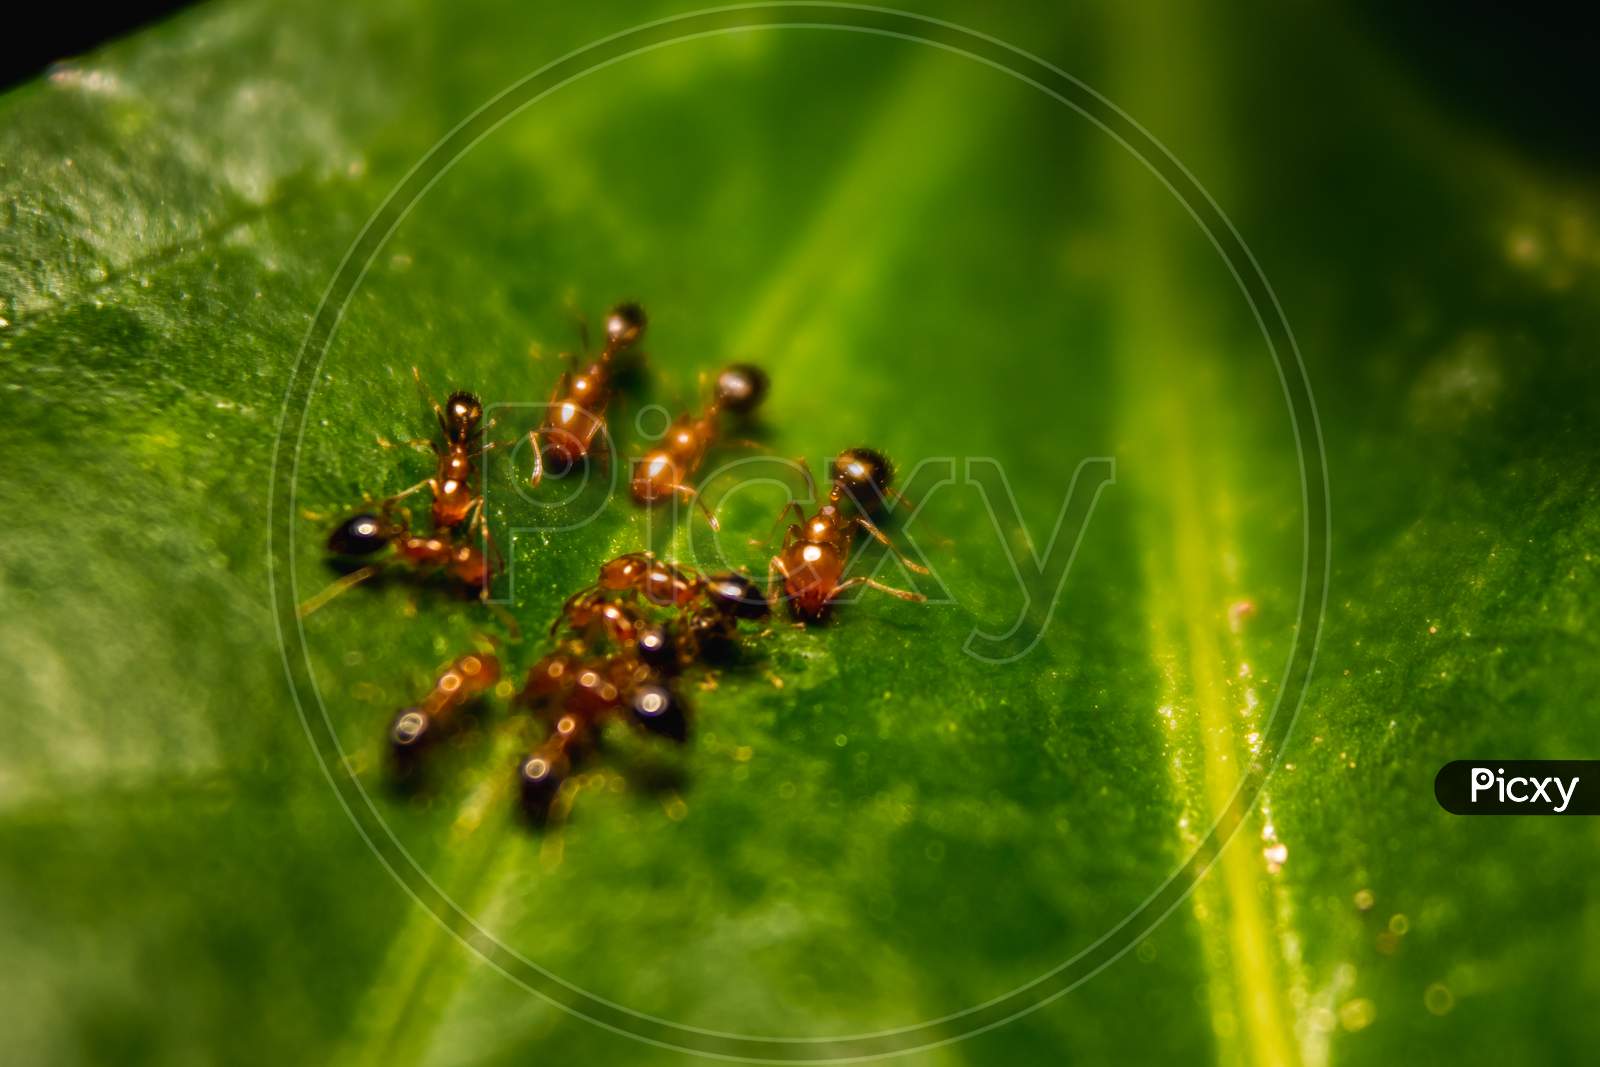 Group Of Small Red Ants / Fire Ants Eating On The Leafs With Selective Focus. Macro Close Up A Lot Of Fire Ant Or Red Ant On Leaves With Lighting.